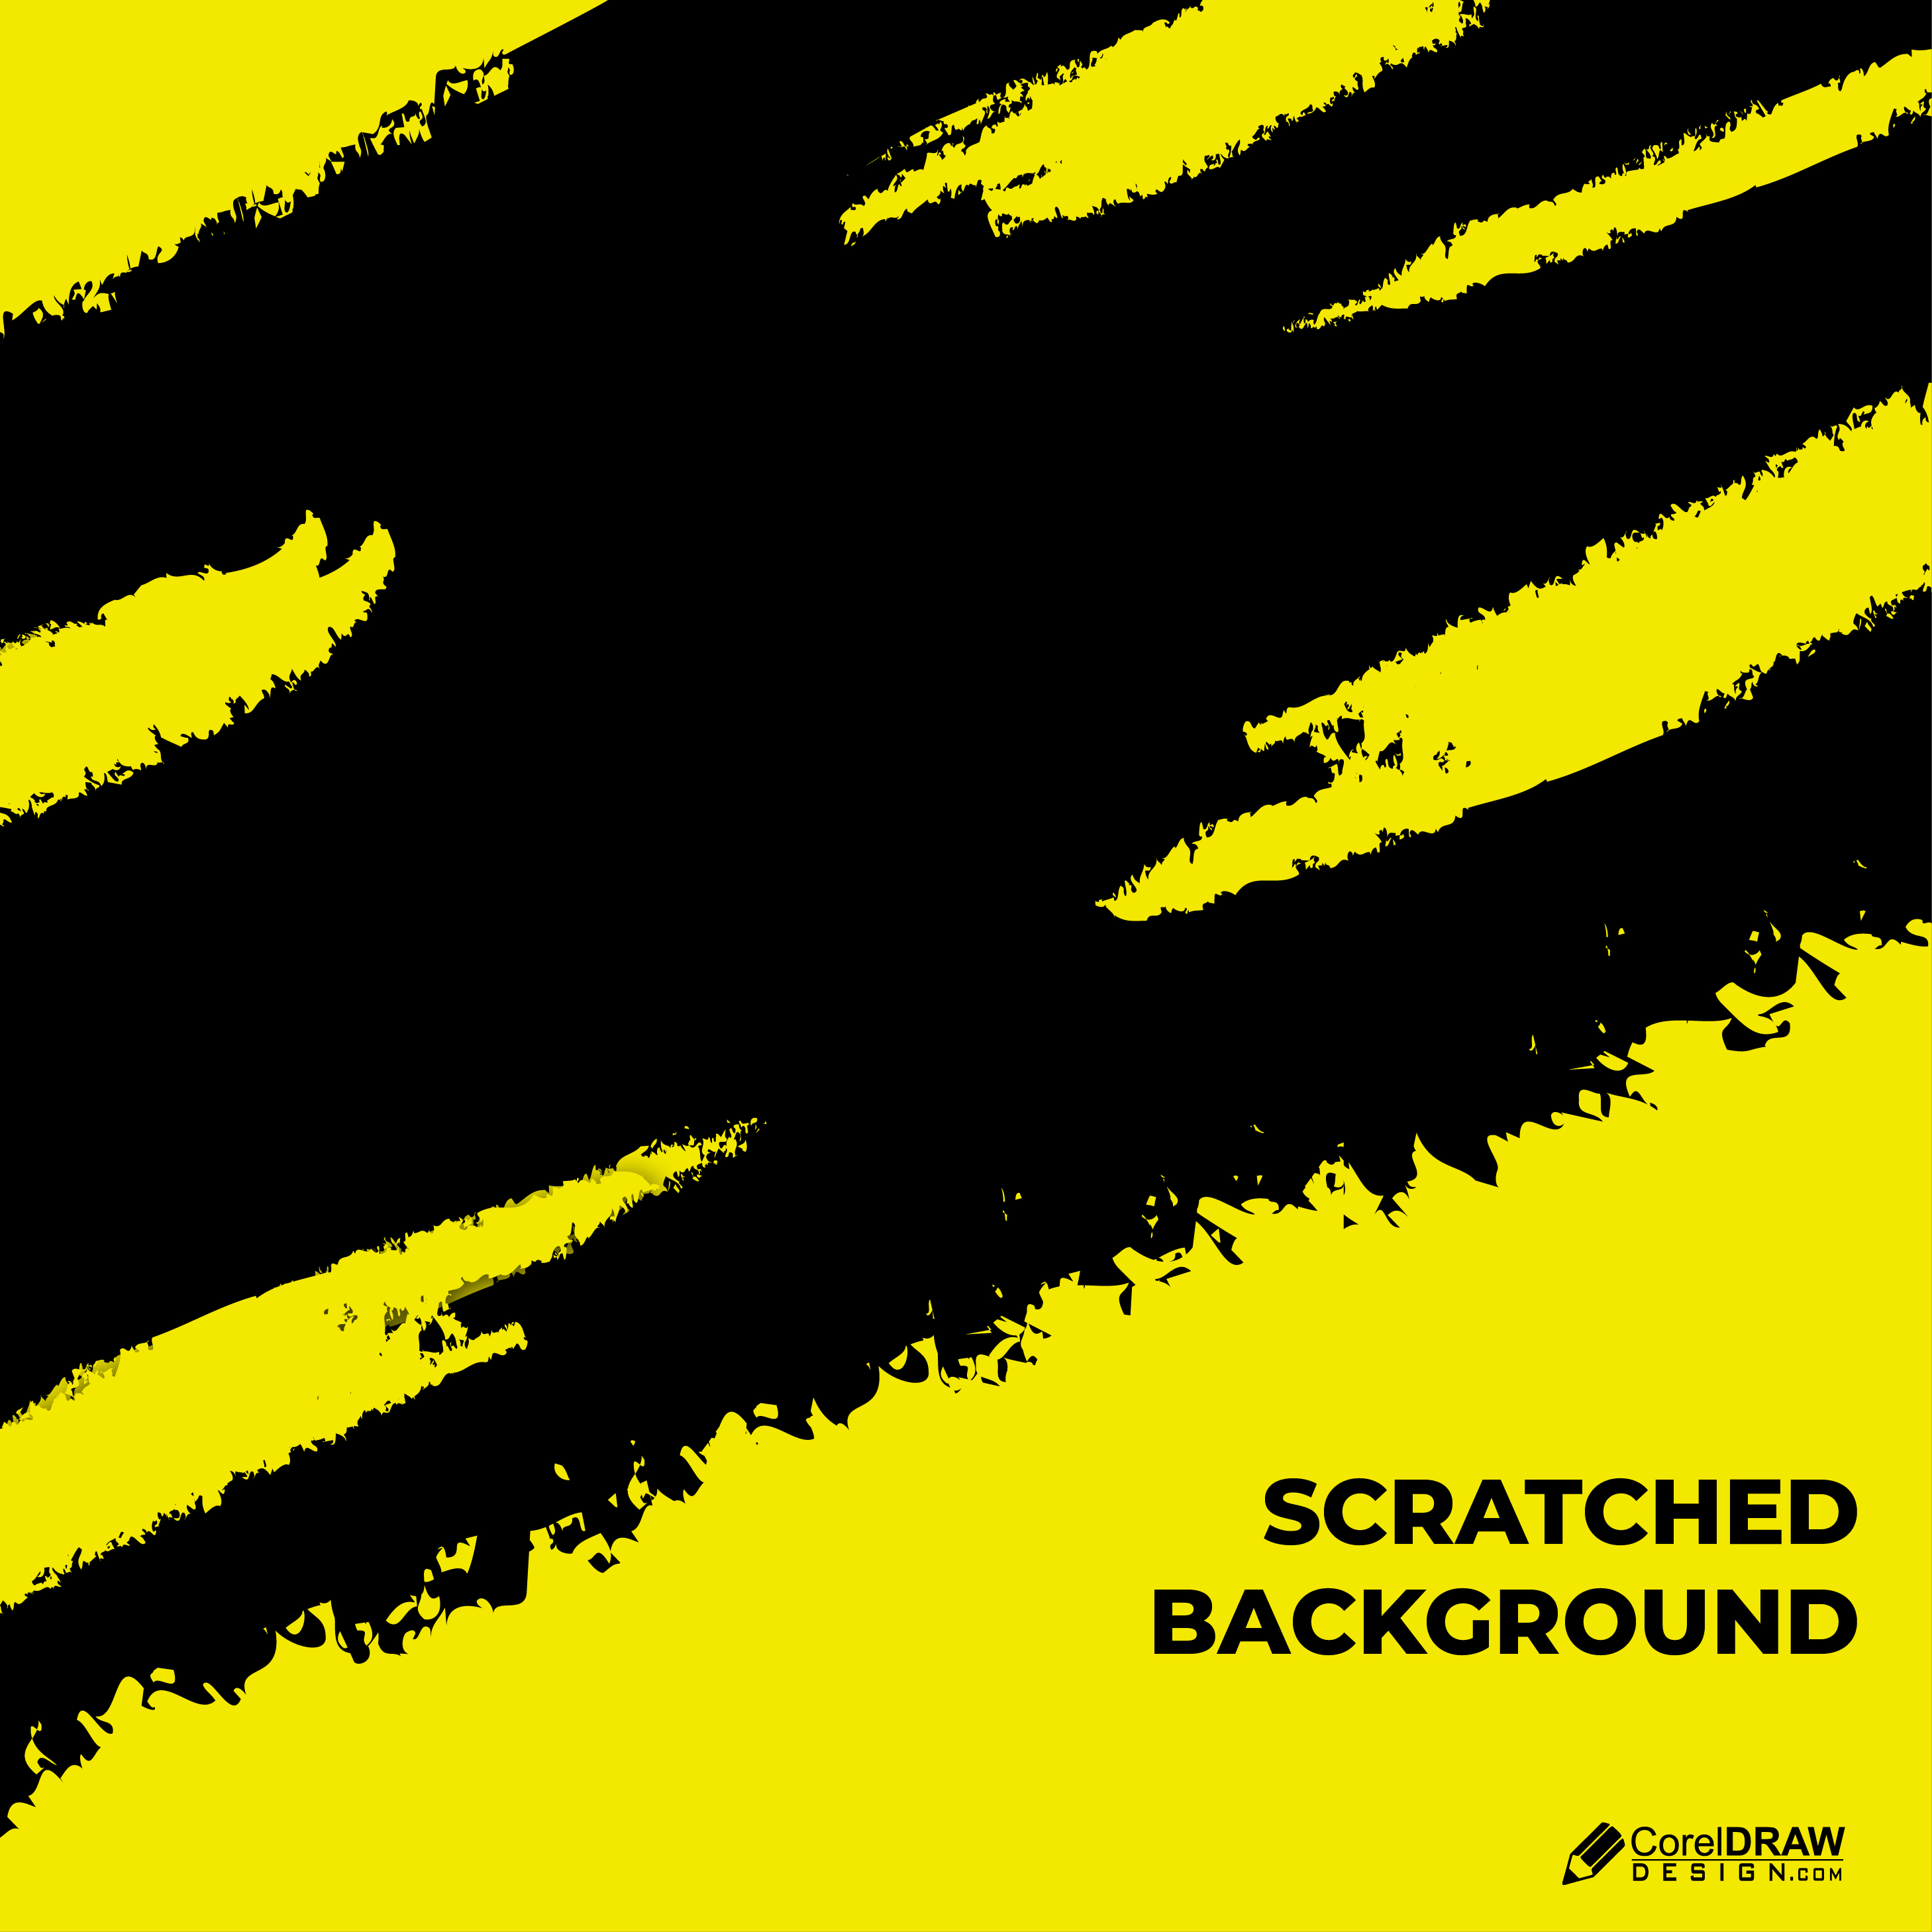 Abstract Scary Scratched Background Vector